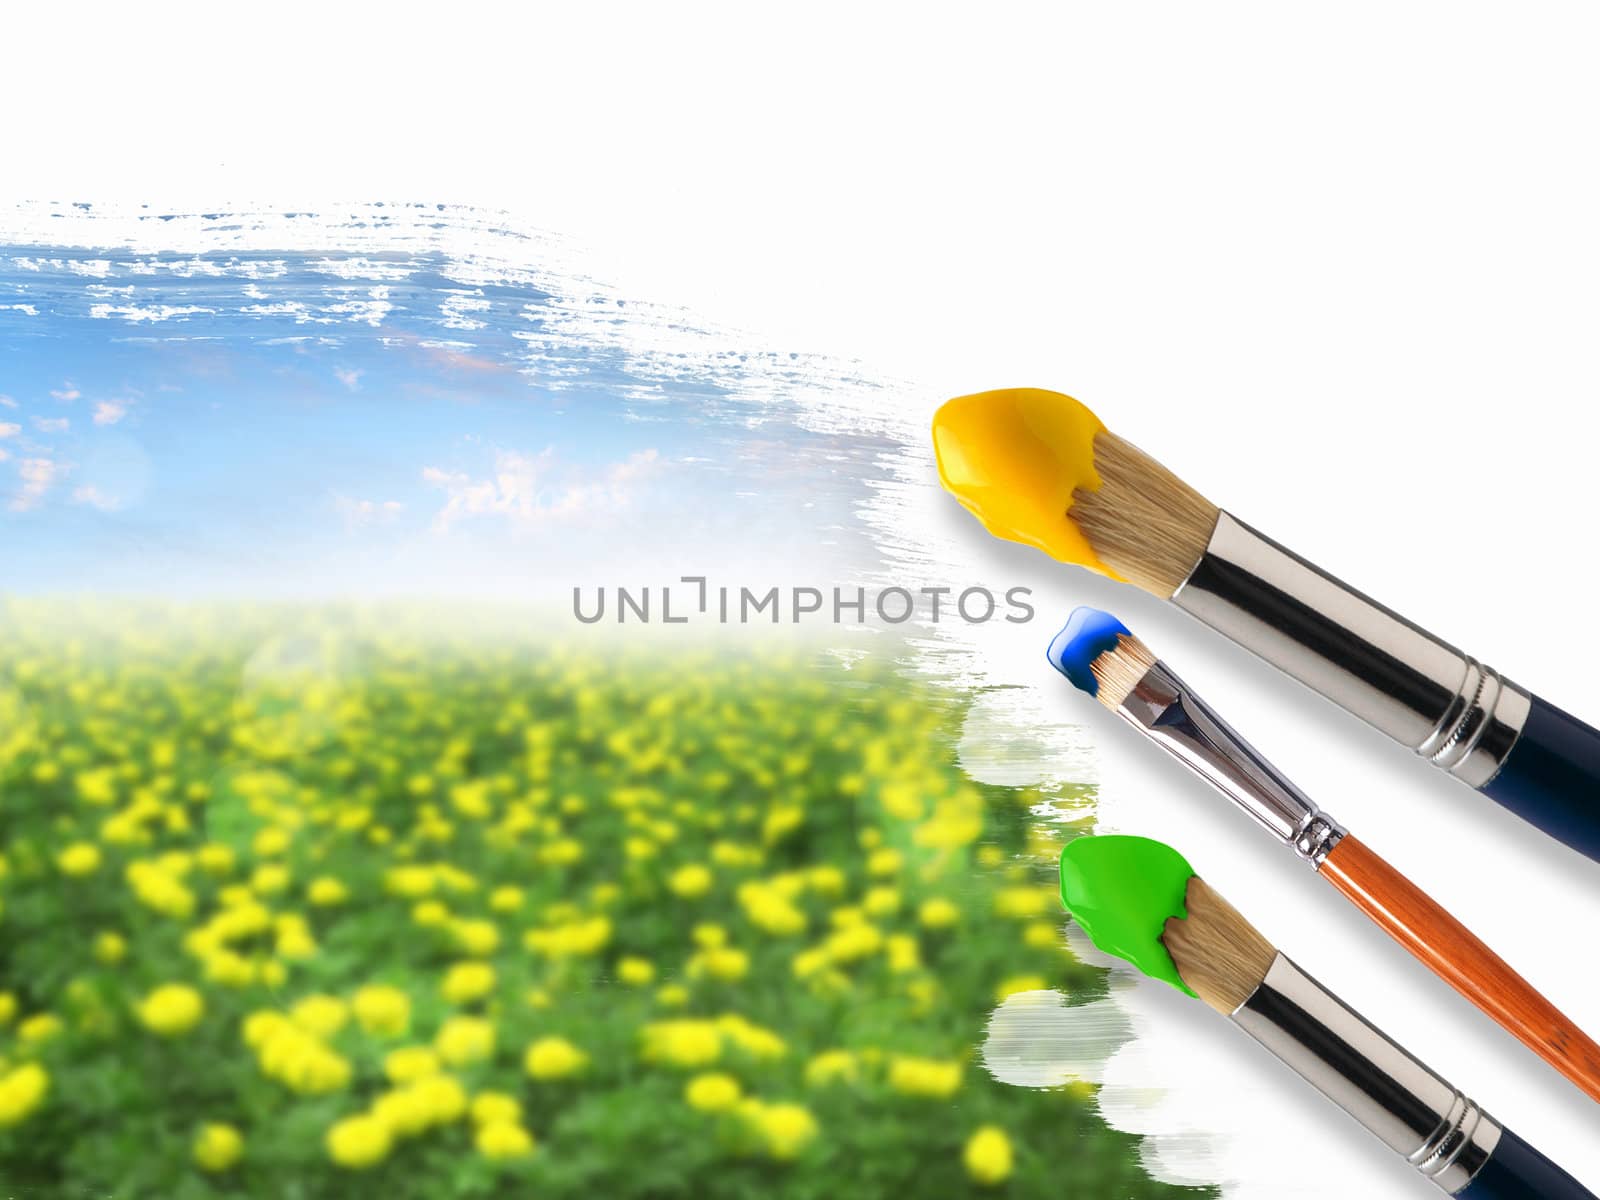 Paint brushes and landscape image by sergey_nivens